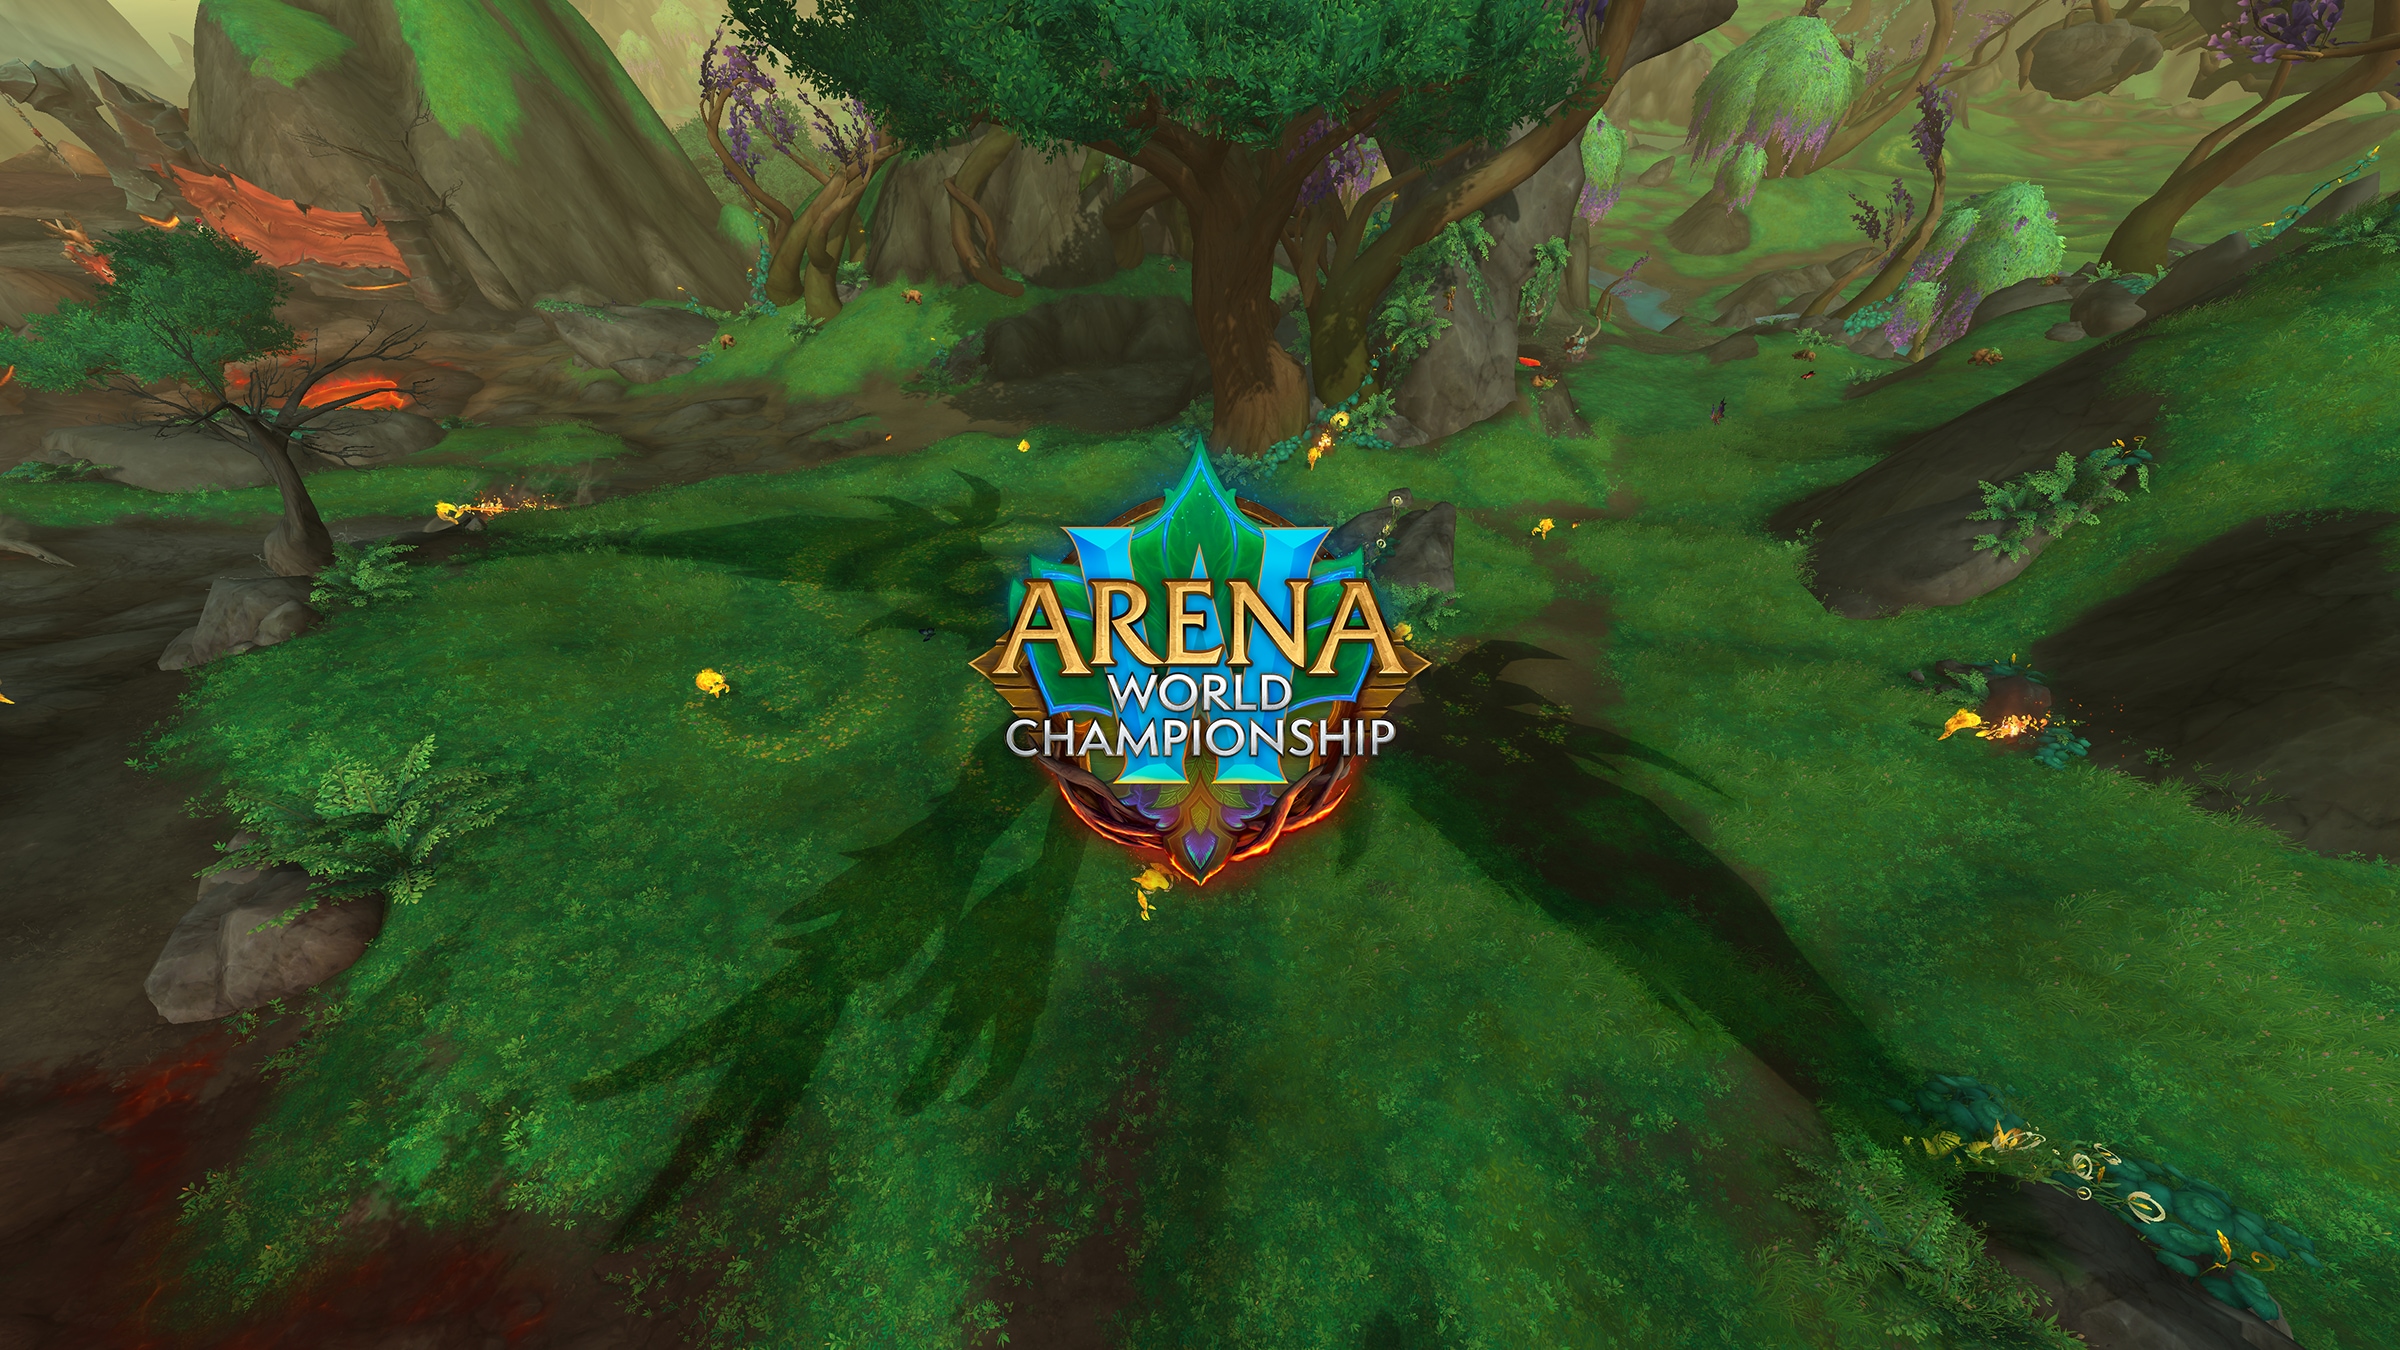 The Arena World Championship Begins February 2!